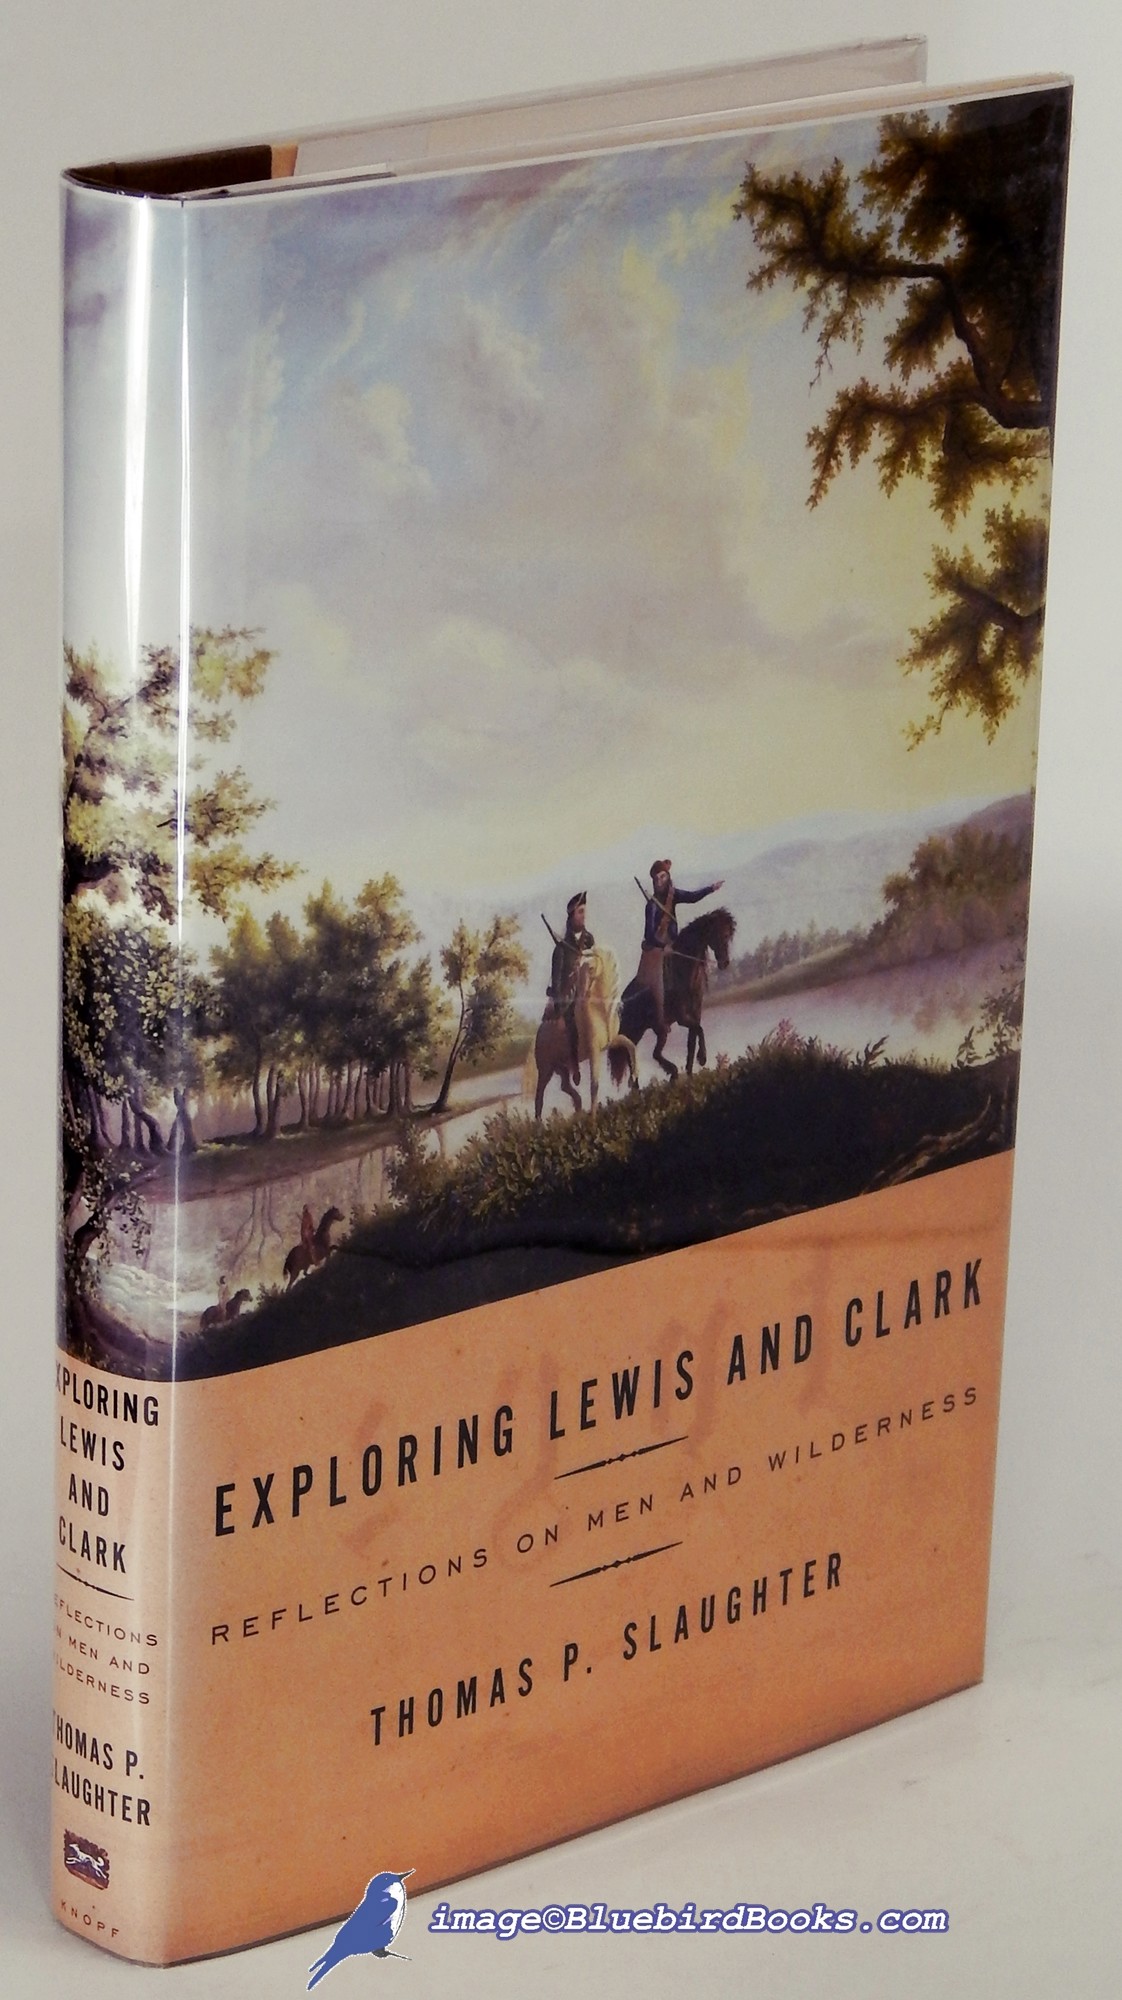 Image for Exploring Lewis and Clark: Reflections on Men and Wilderness